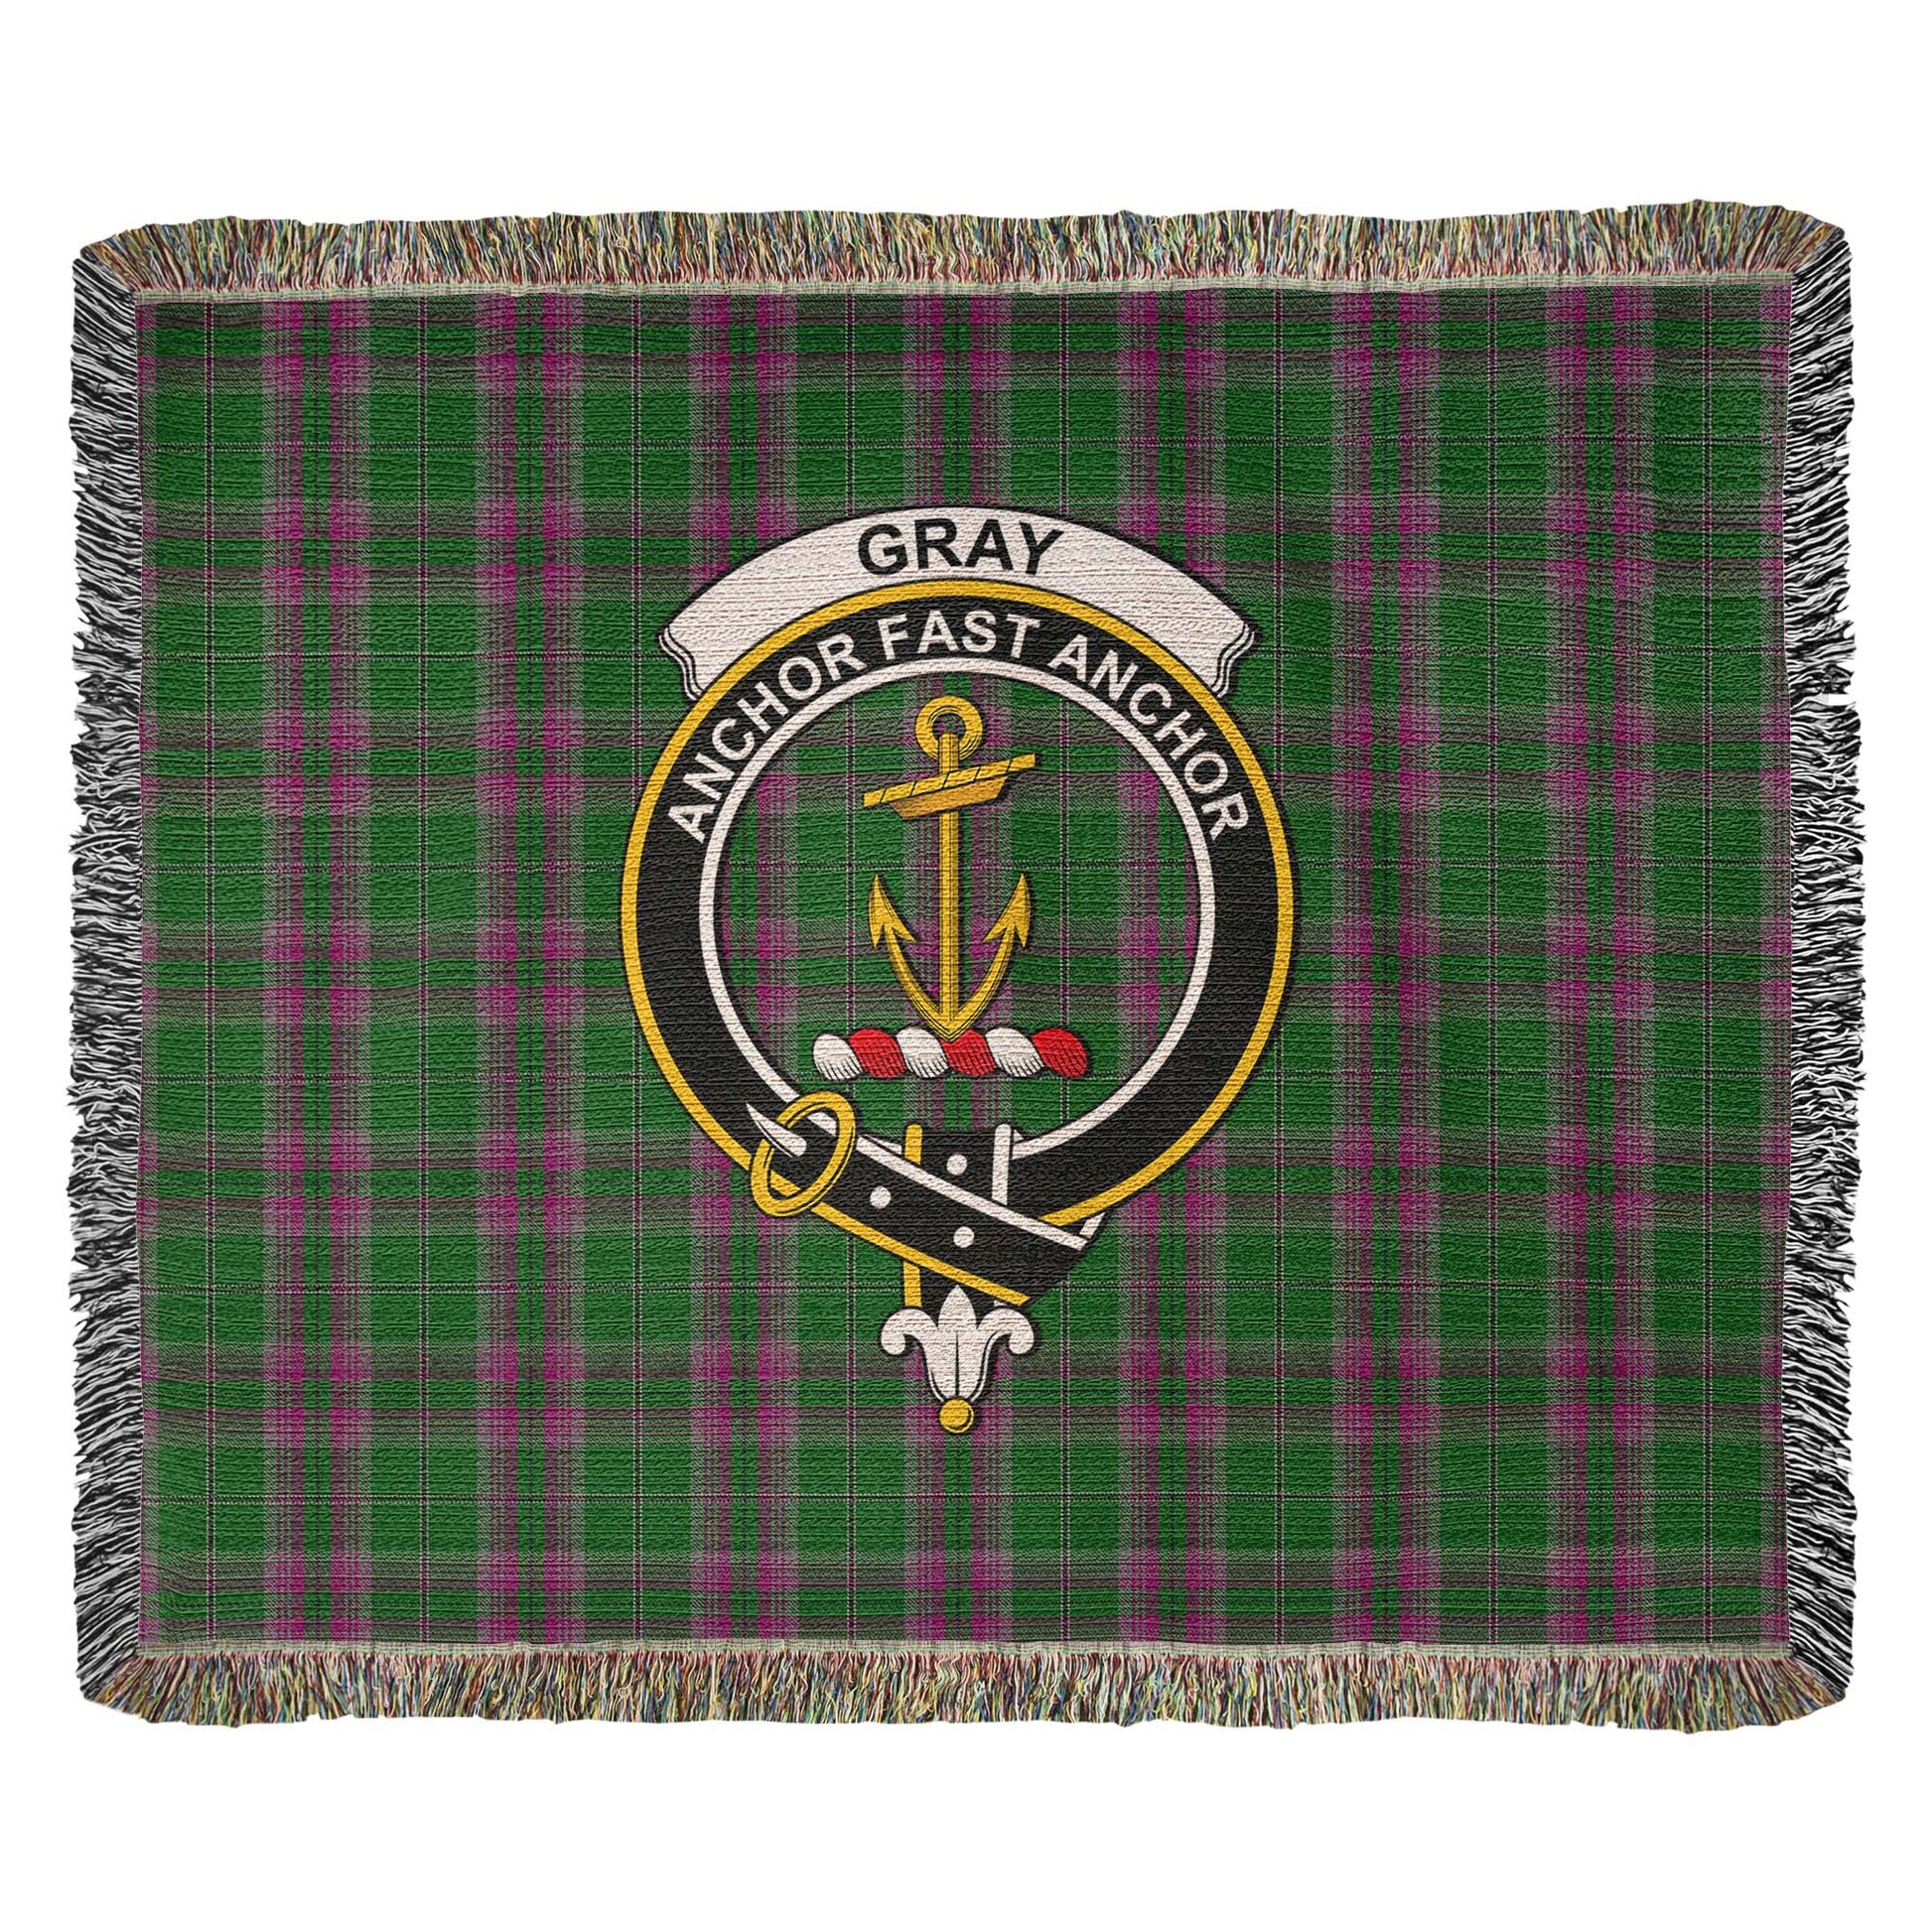 Tartan Vibes Clothing Gray Hunting Tartan Woven Blanket with Family Crest